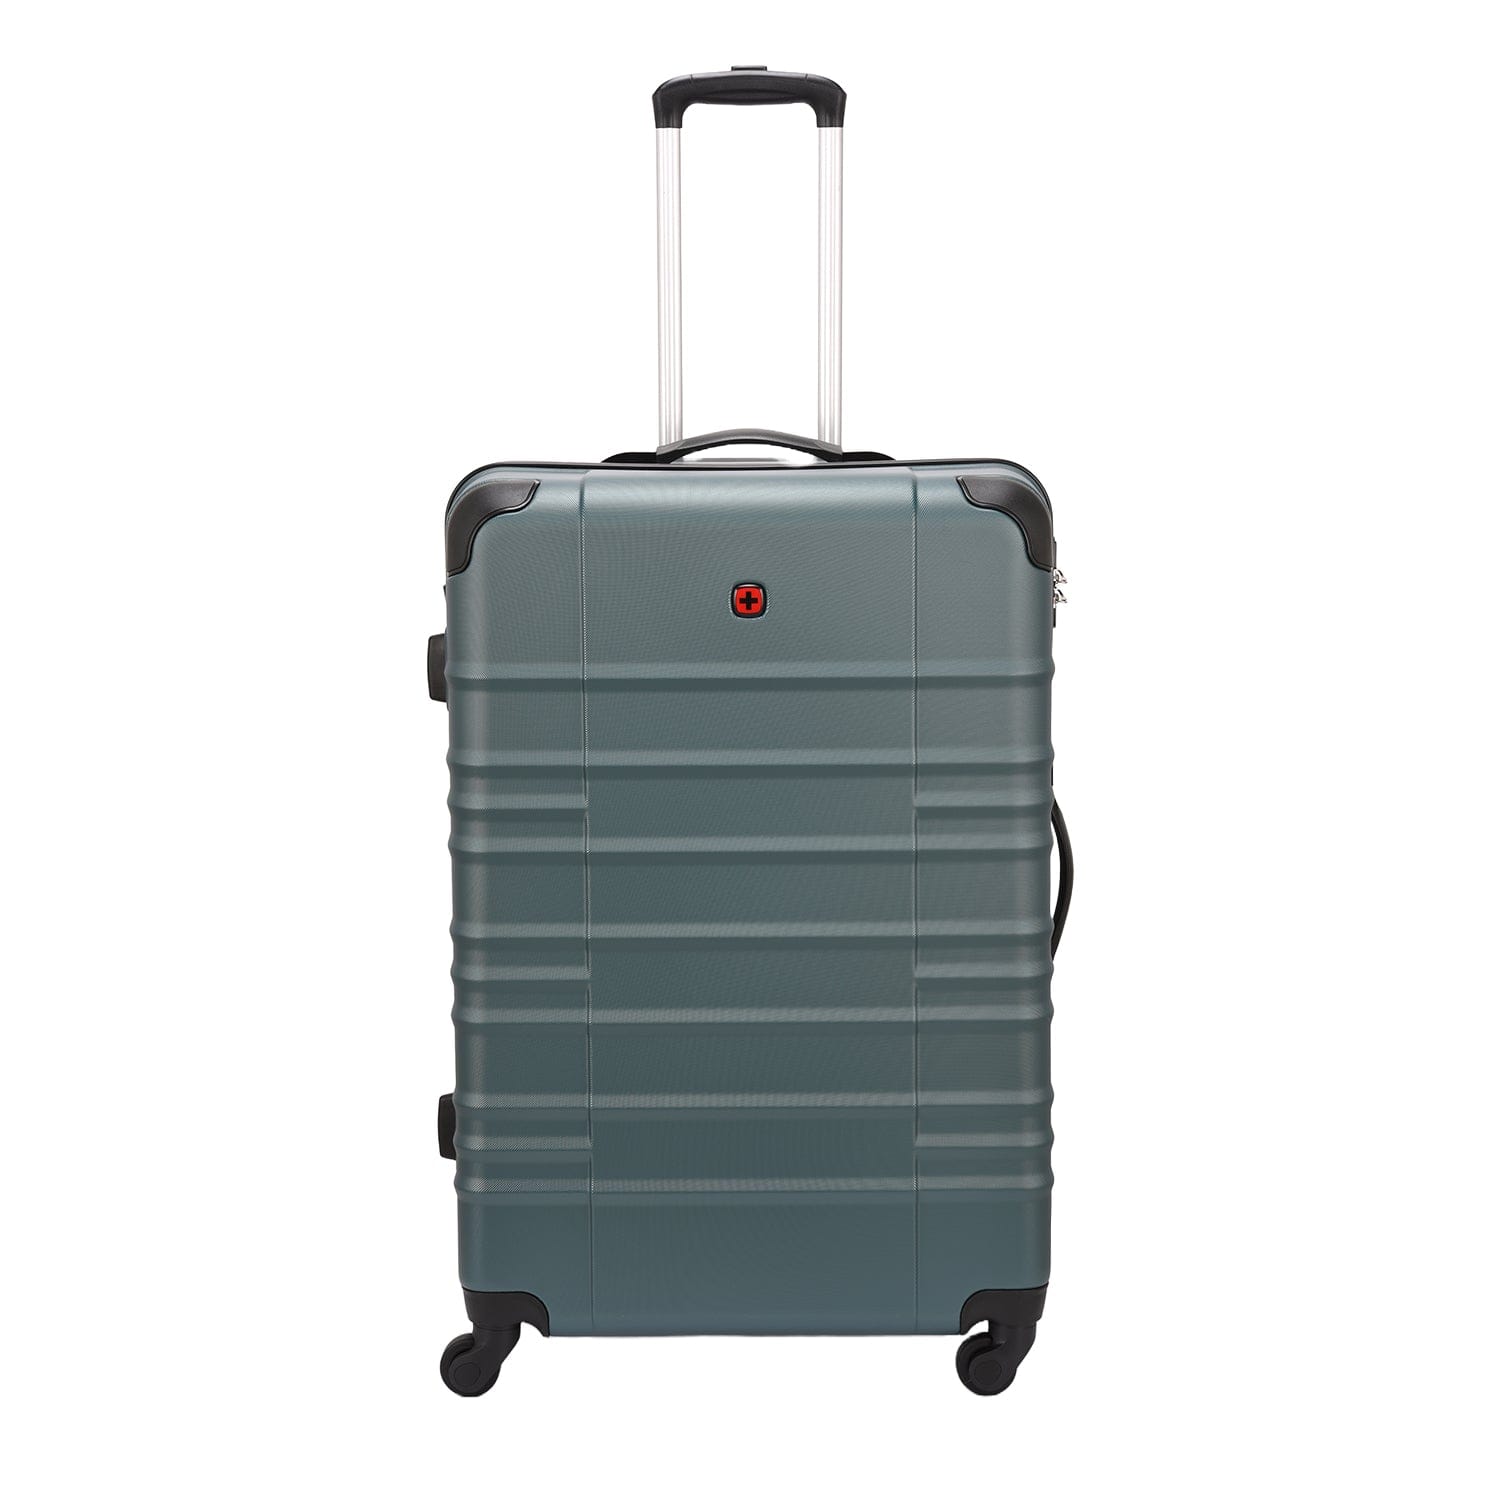 Wenger Amplar 3 Piece 53+65+75cm Hardside Non-Expandable Check-In Luggage Trolley Set Deep Lake - 653151